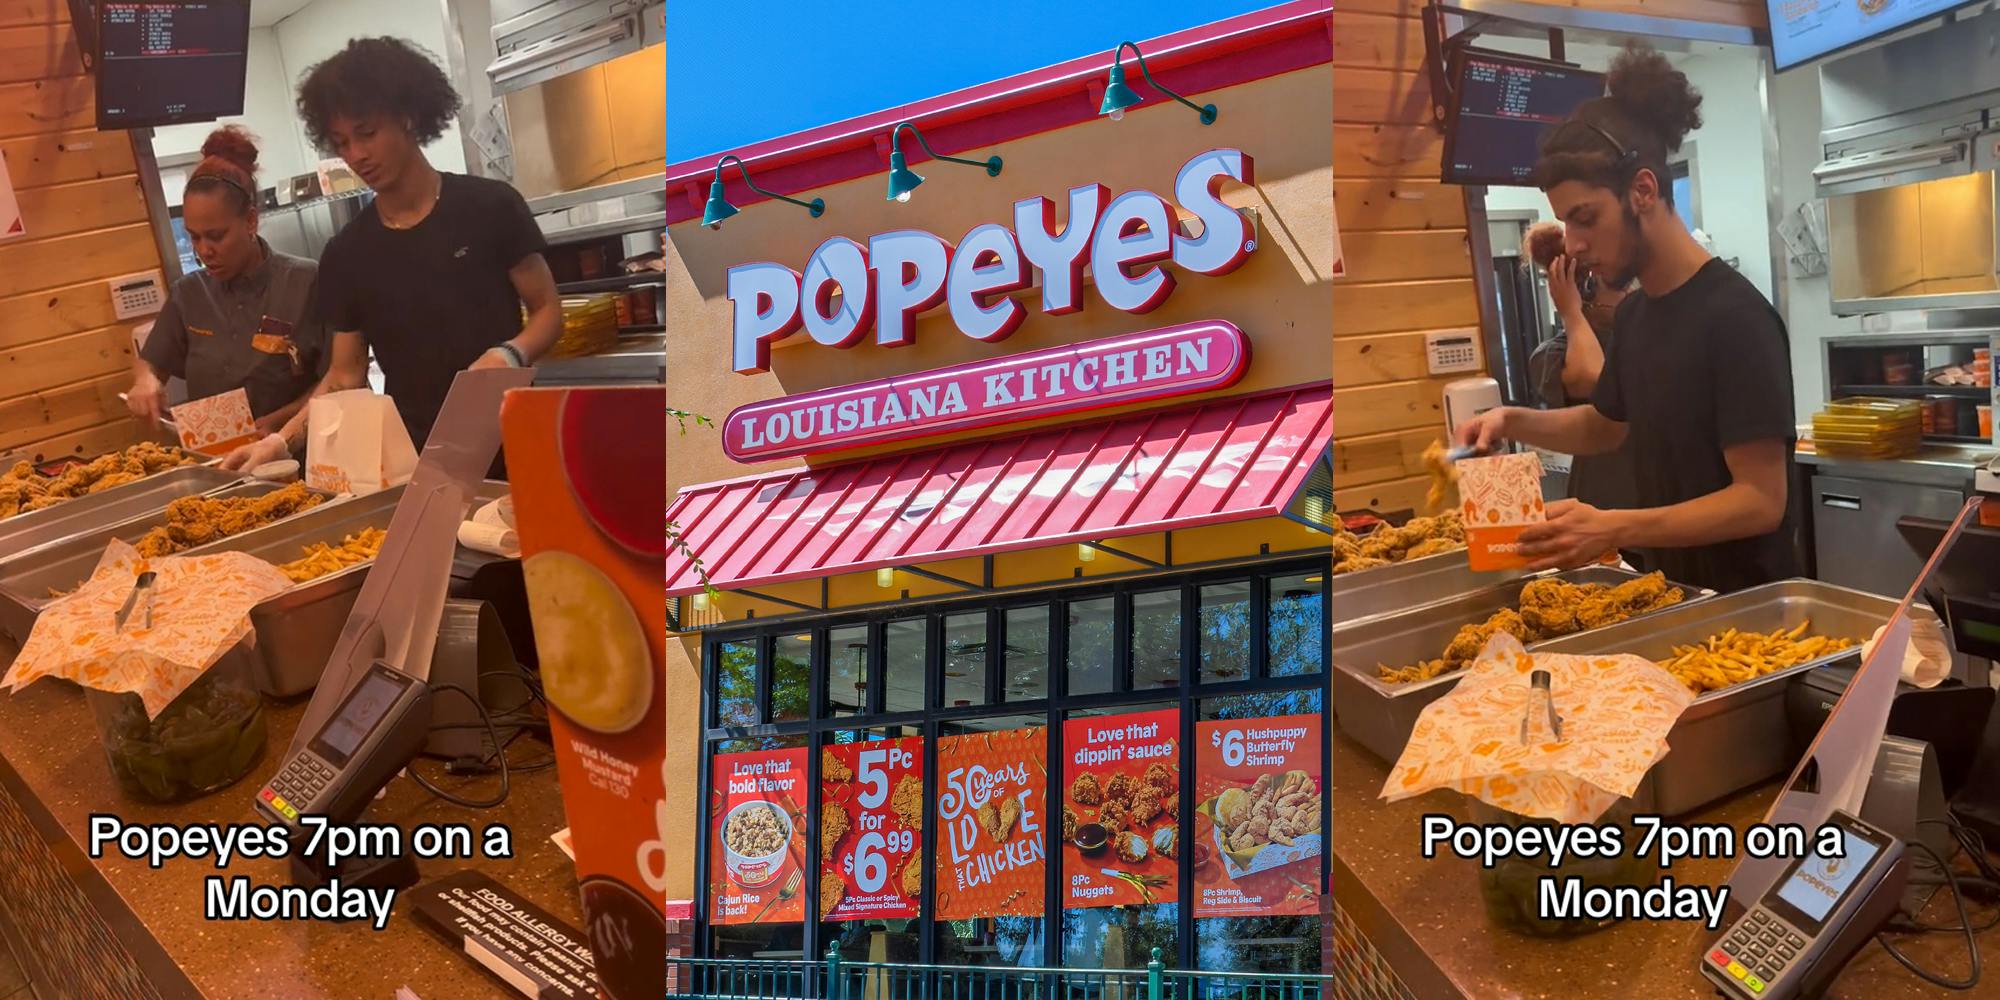 Popeye's workers getting food from counter to place in boxes with caption "Popeyes 7pm on a Monday" (l) Popeyes building with sign (c) Popeye's workers getting food from counter to place in boxes with caption "Popeyes 7pm on a Monday" (r)